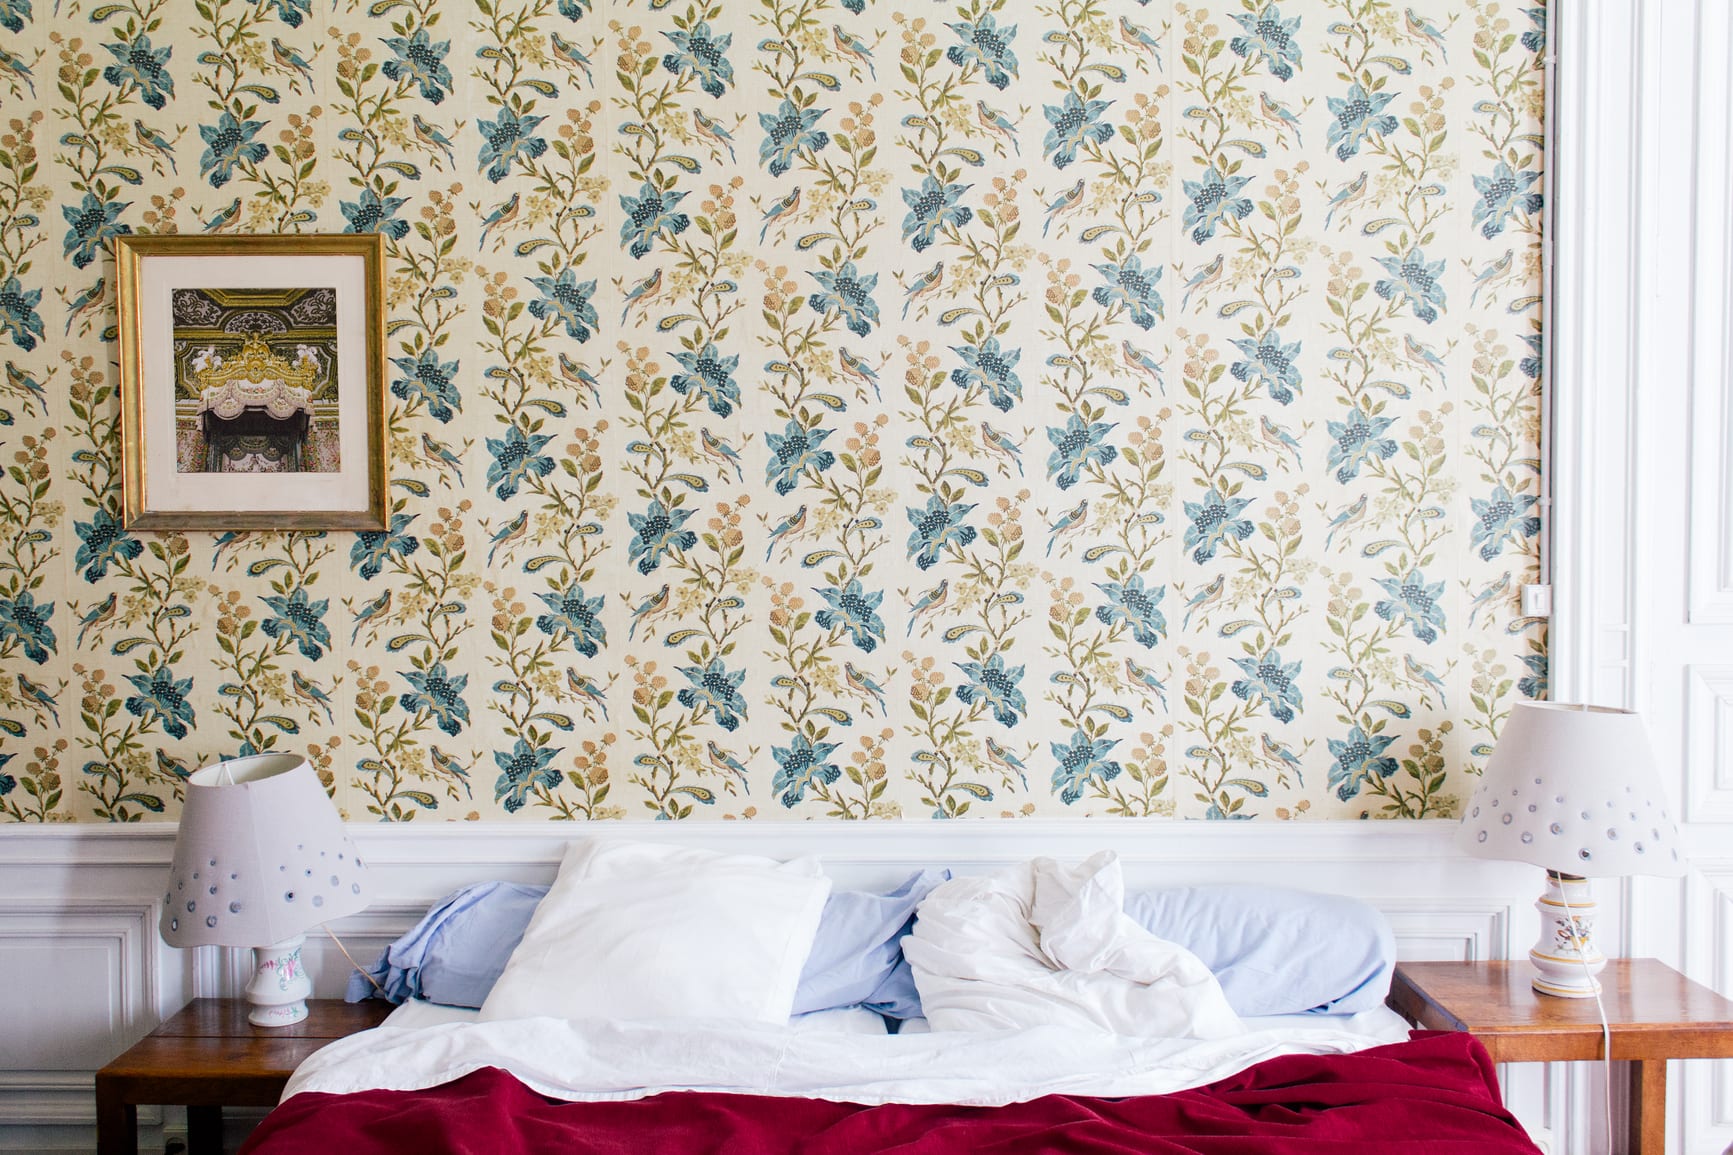 French vintage bedroom furniture with beautiful floral pattern wallpaper in the old castle.